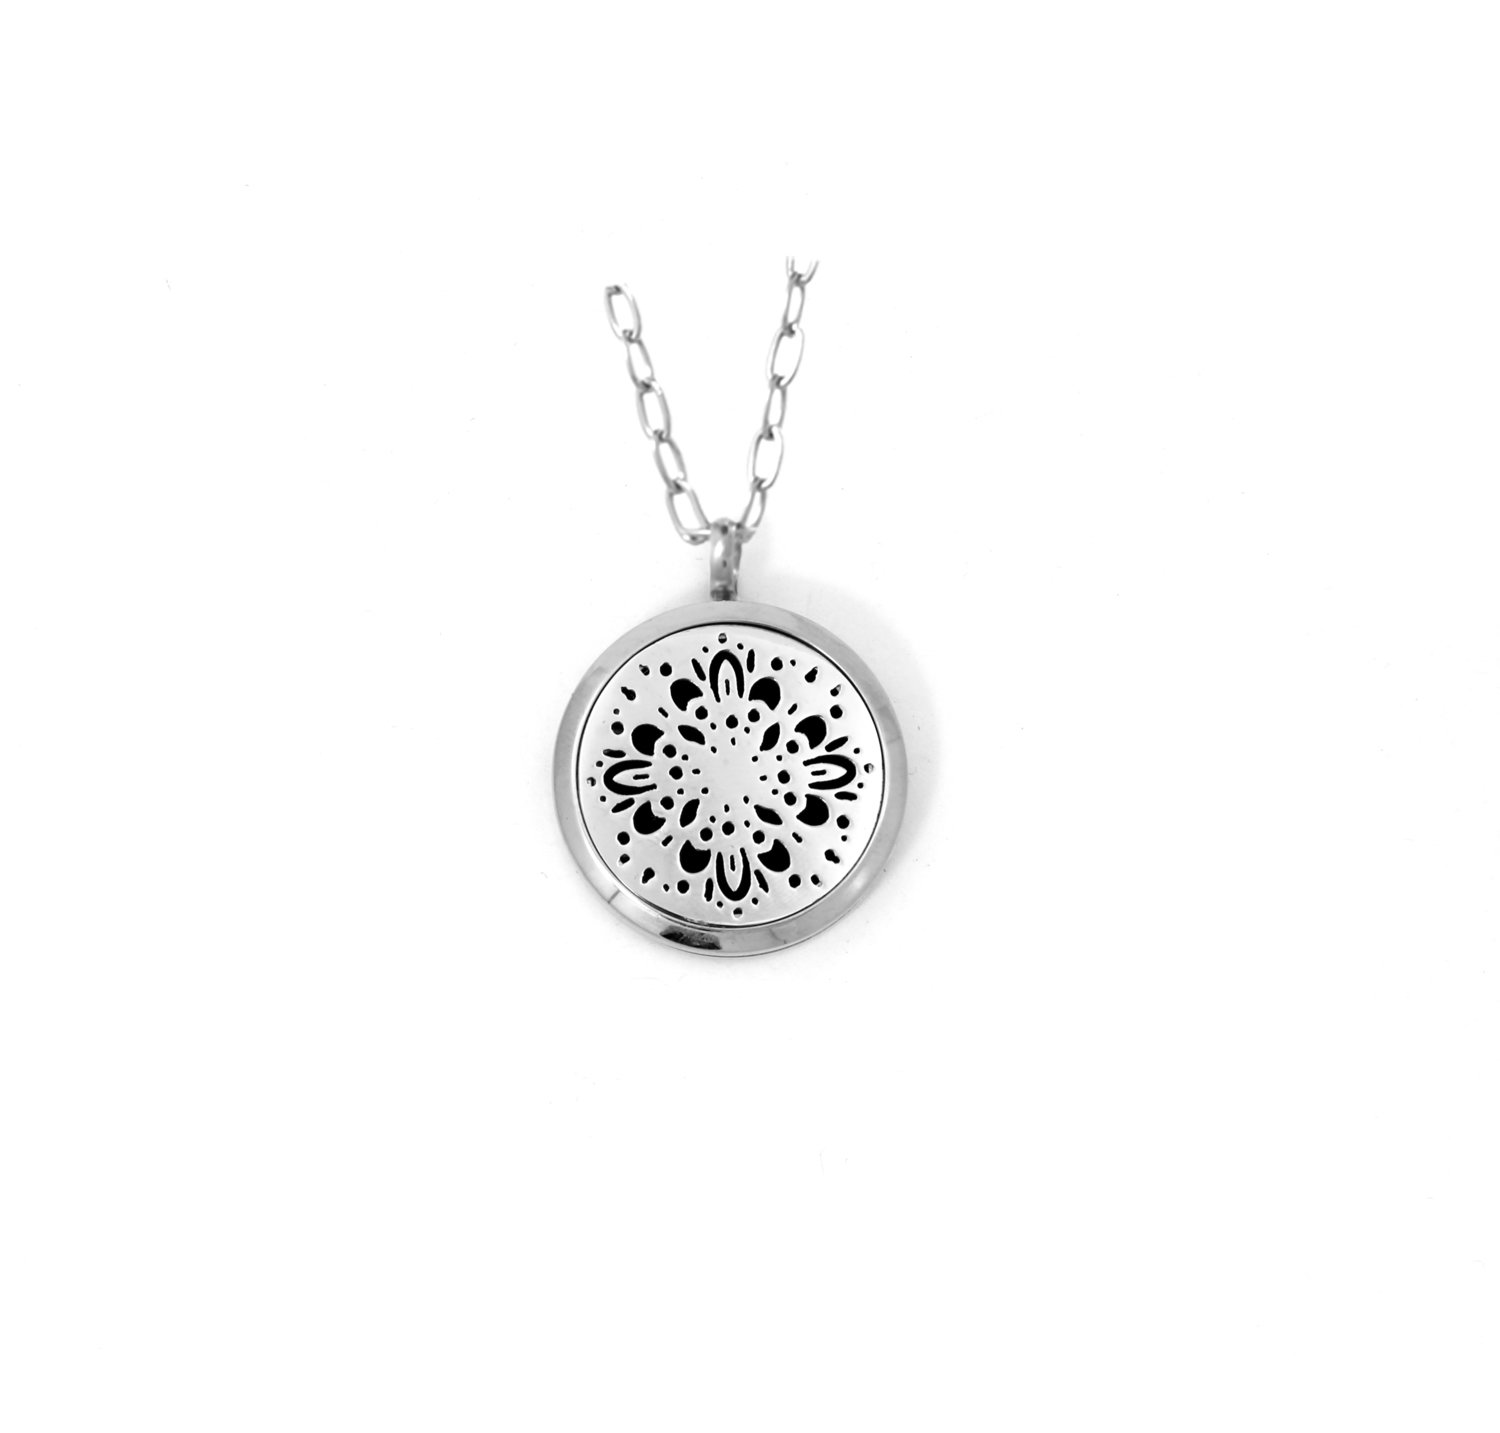 Diffusing Magnetic Starburst Mandala Pendant - includes Two Leather Inserts